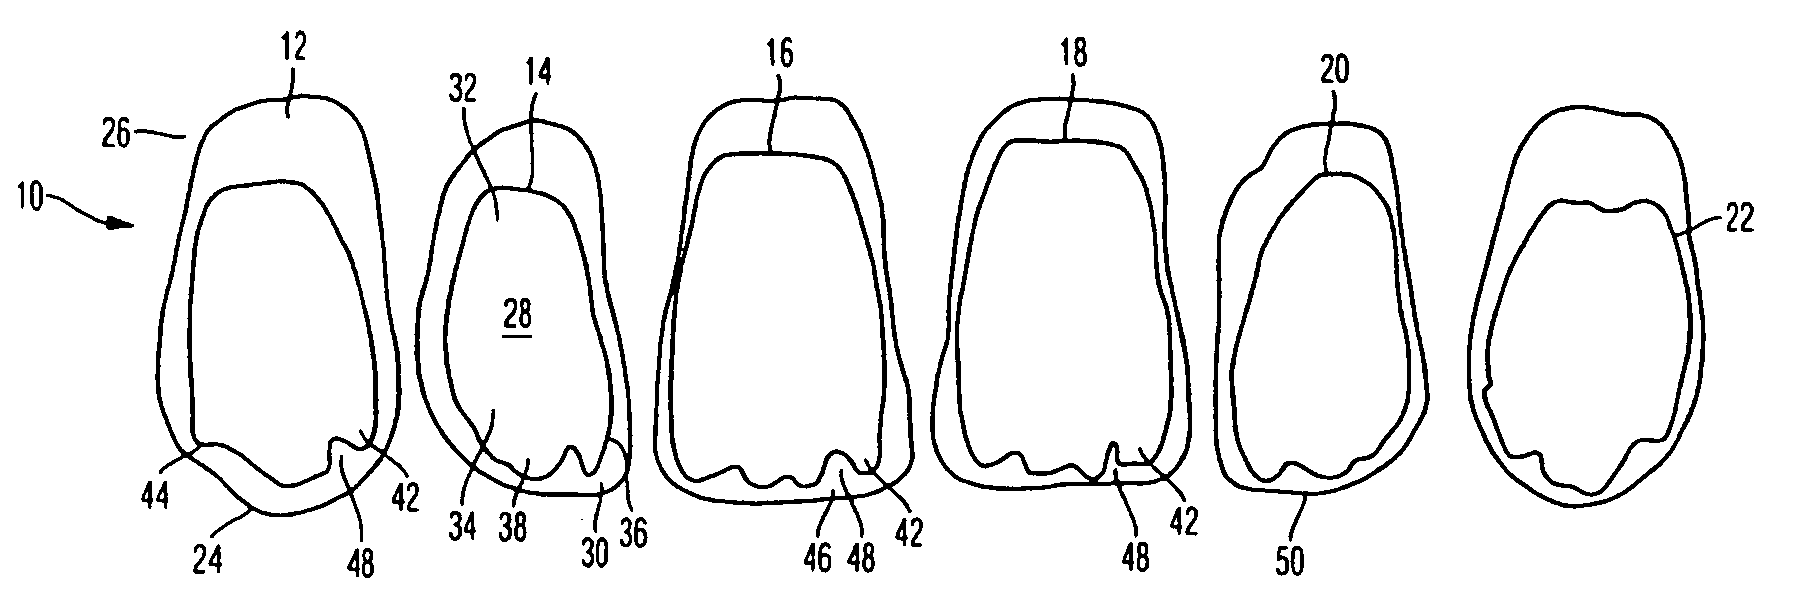 Incisor tooth or canine tooth, and set of teeth, and method for producing and incisor tooth or canine tooth